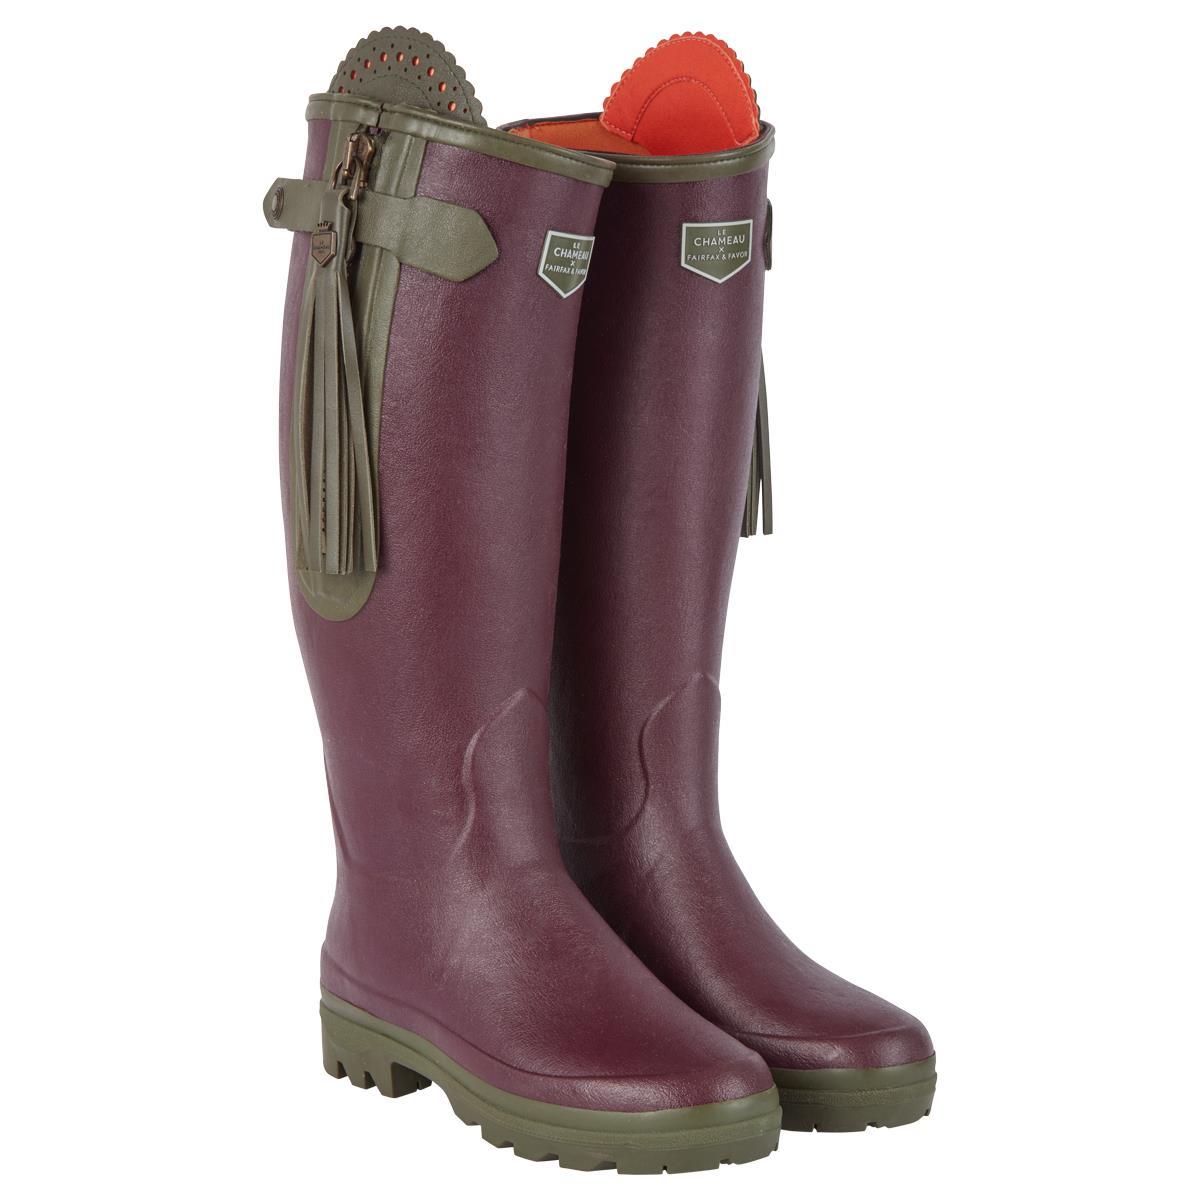 What are the features of the L'Alliance Wellington Boot by Fairfax & Favor?